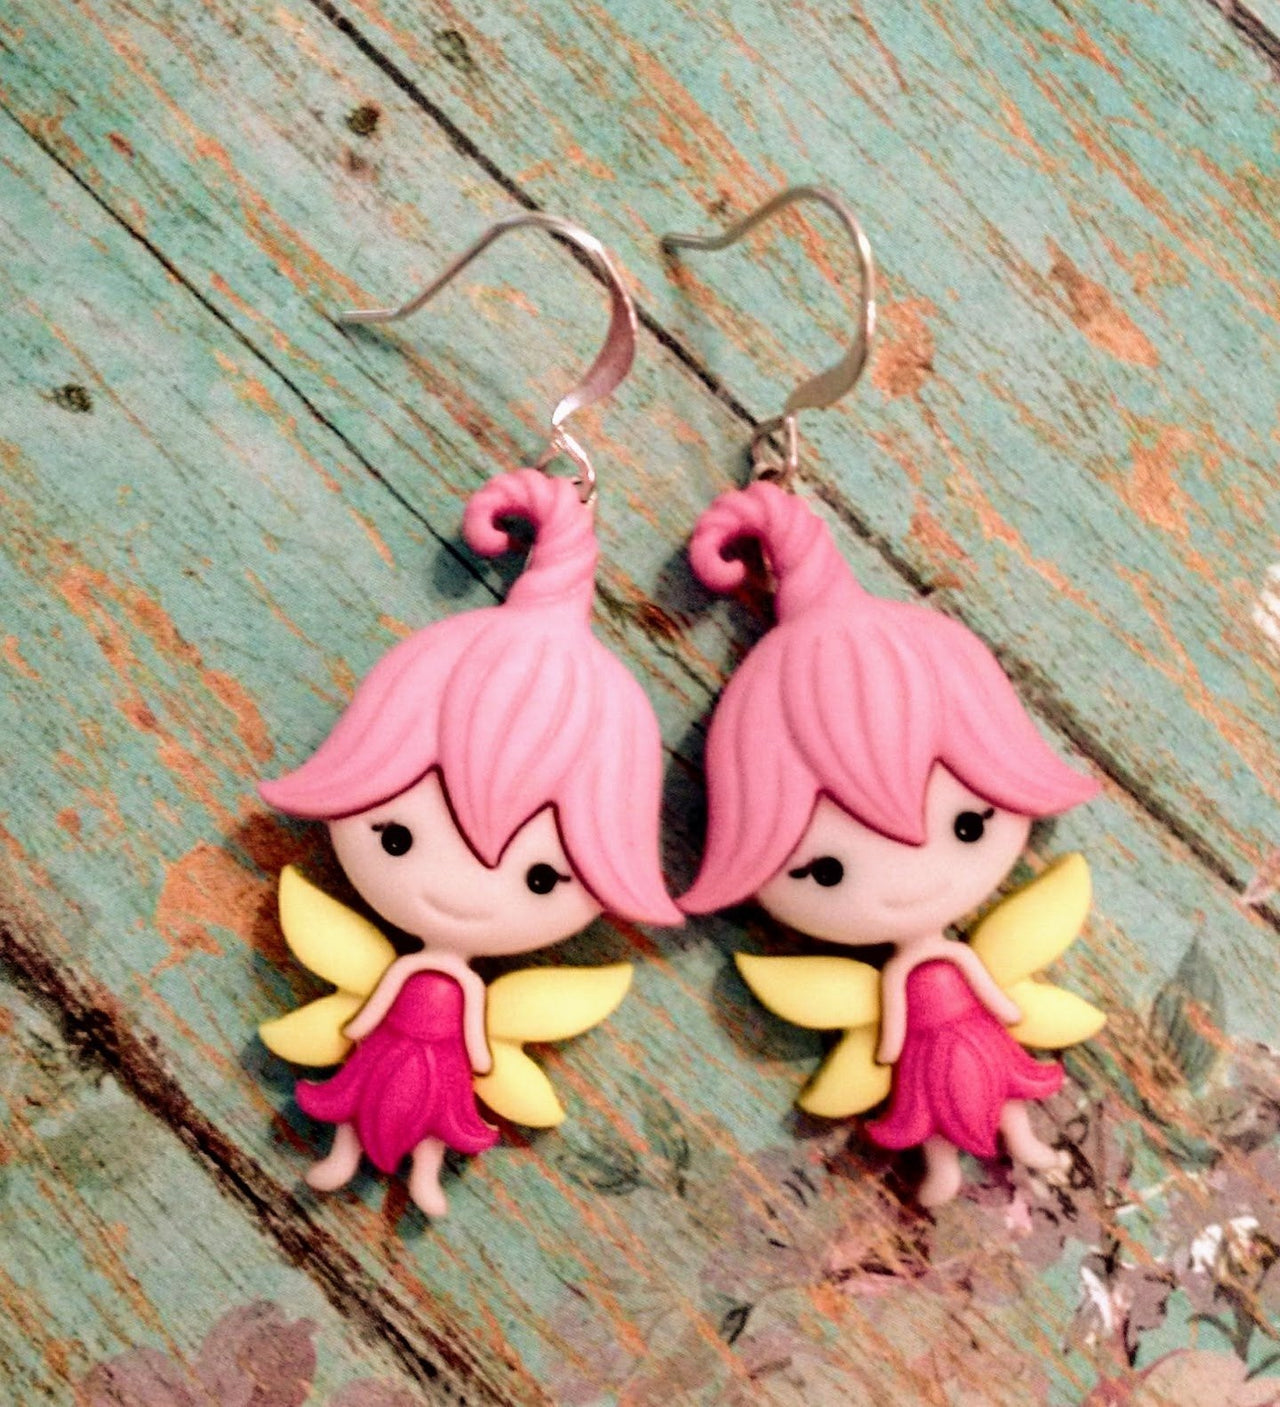 fairy earrings, fairy jewelry, fairy gifts, flower earrings, inexpensive earrings, gifts under 10, gifts for her, inexpensive gifts, fairies